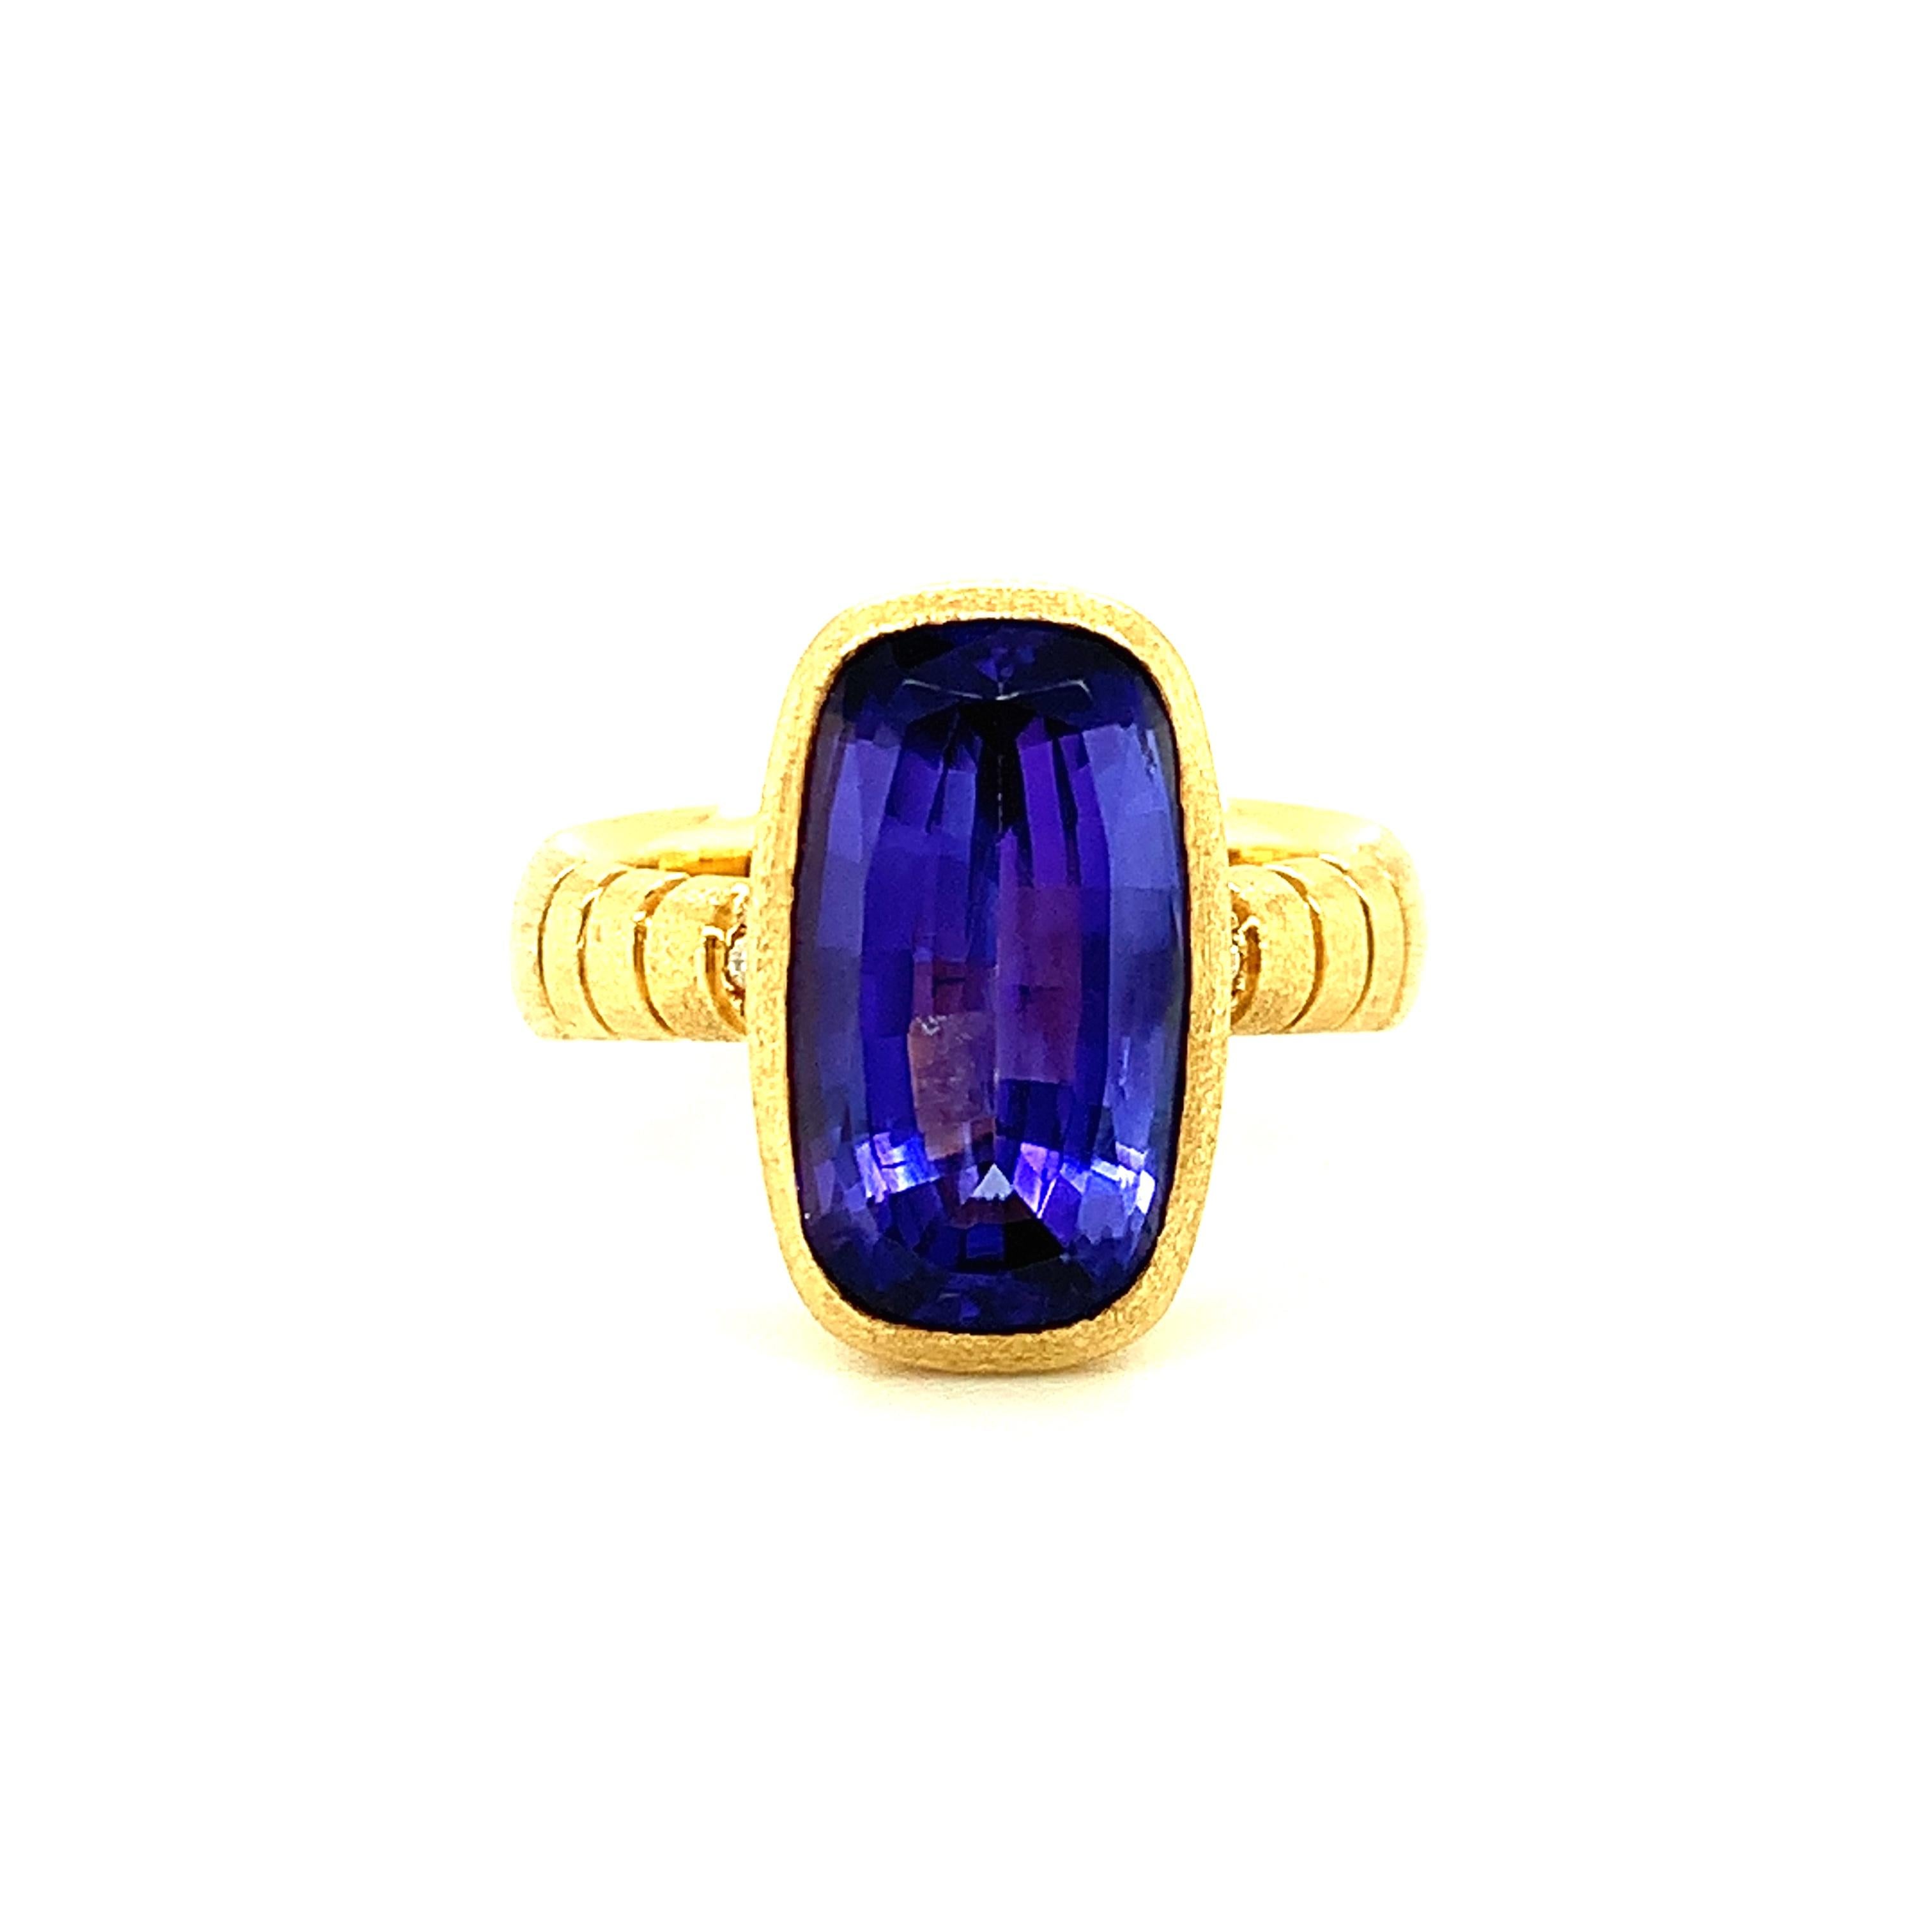 This one-of-a-kind ring shows off the beautiful, elongated shape of this richly colored gem tanzanite! The 6.09 carat tanzanite is a stunning bluish purple color with unusually strong saturation. This ring was handmade in 18k yellow gold, with a